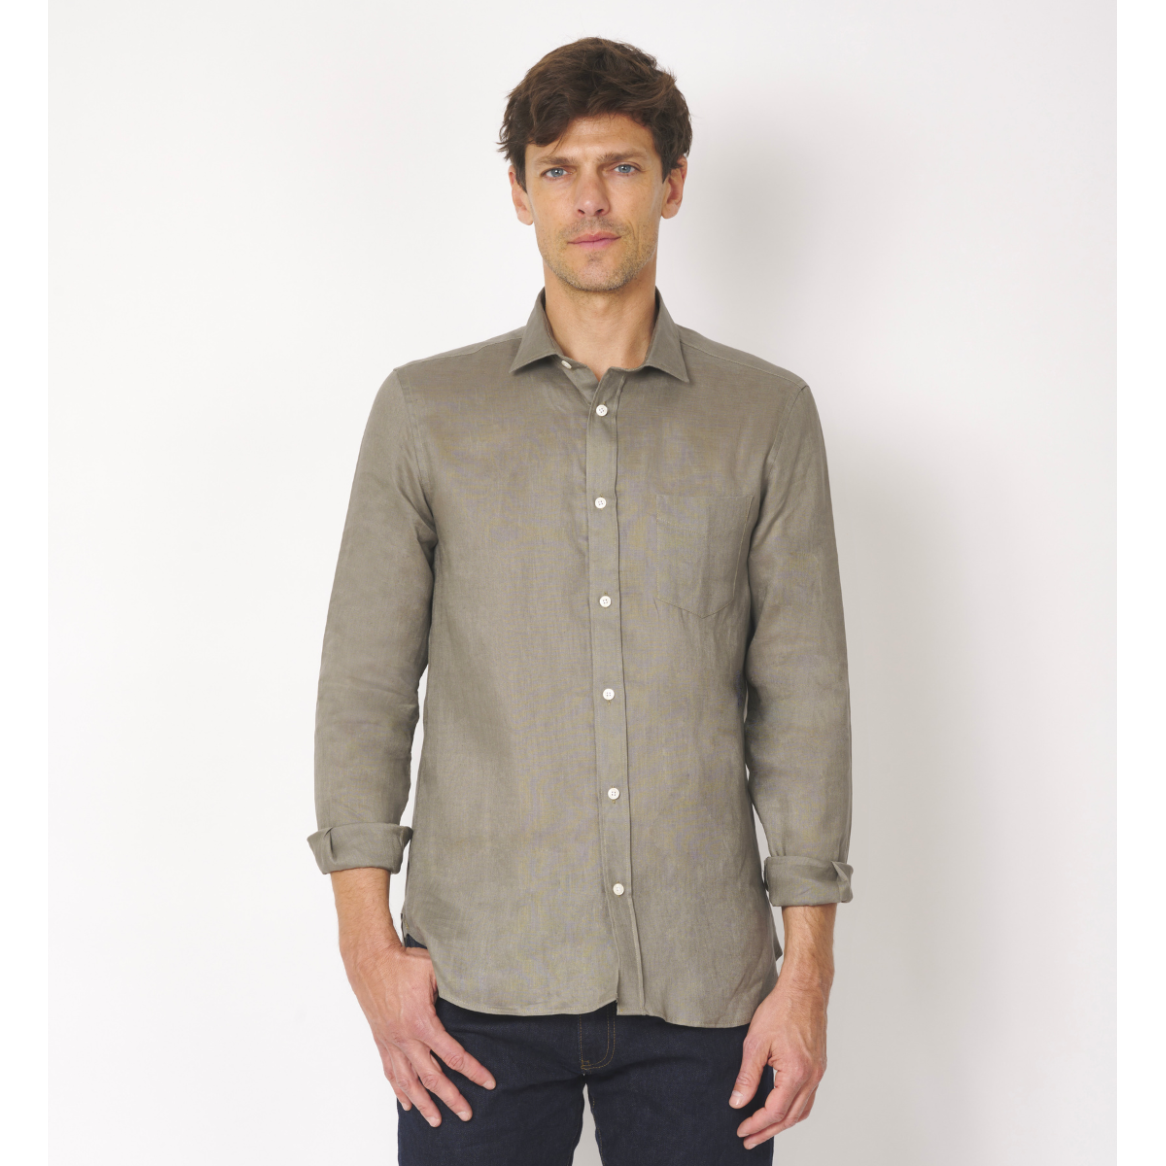 Chemise en lin taupe coupe droite